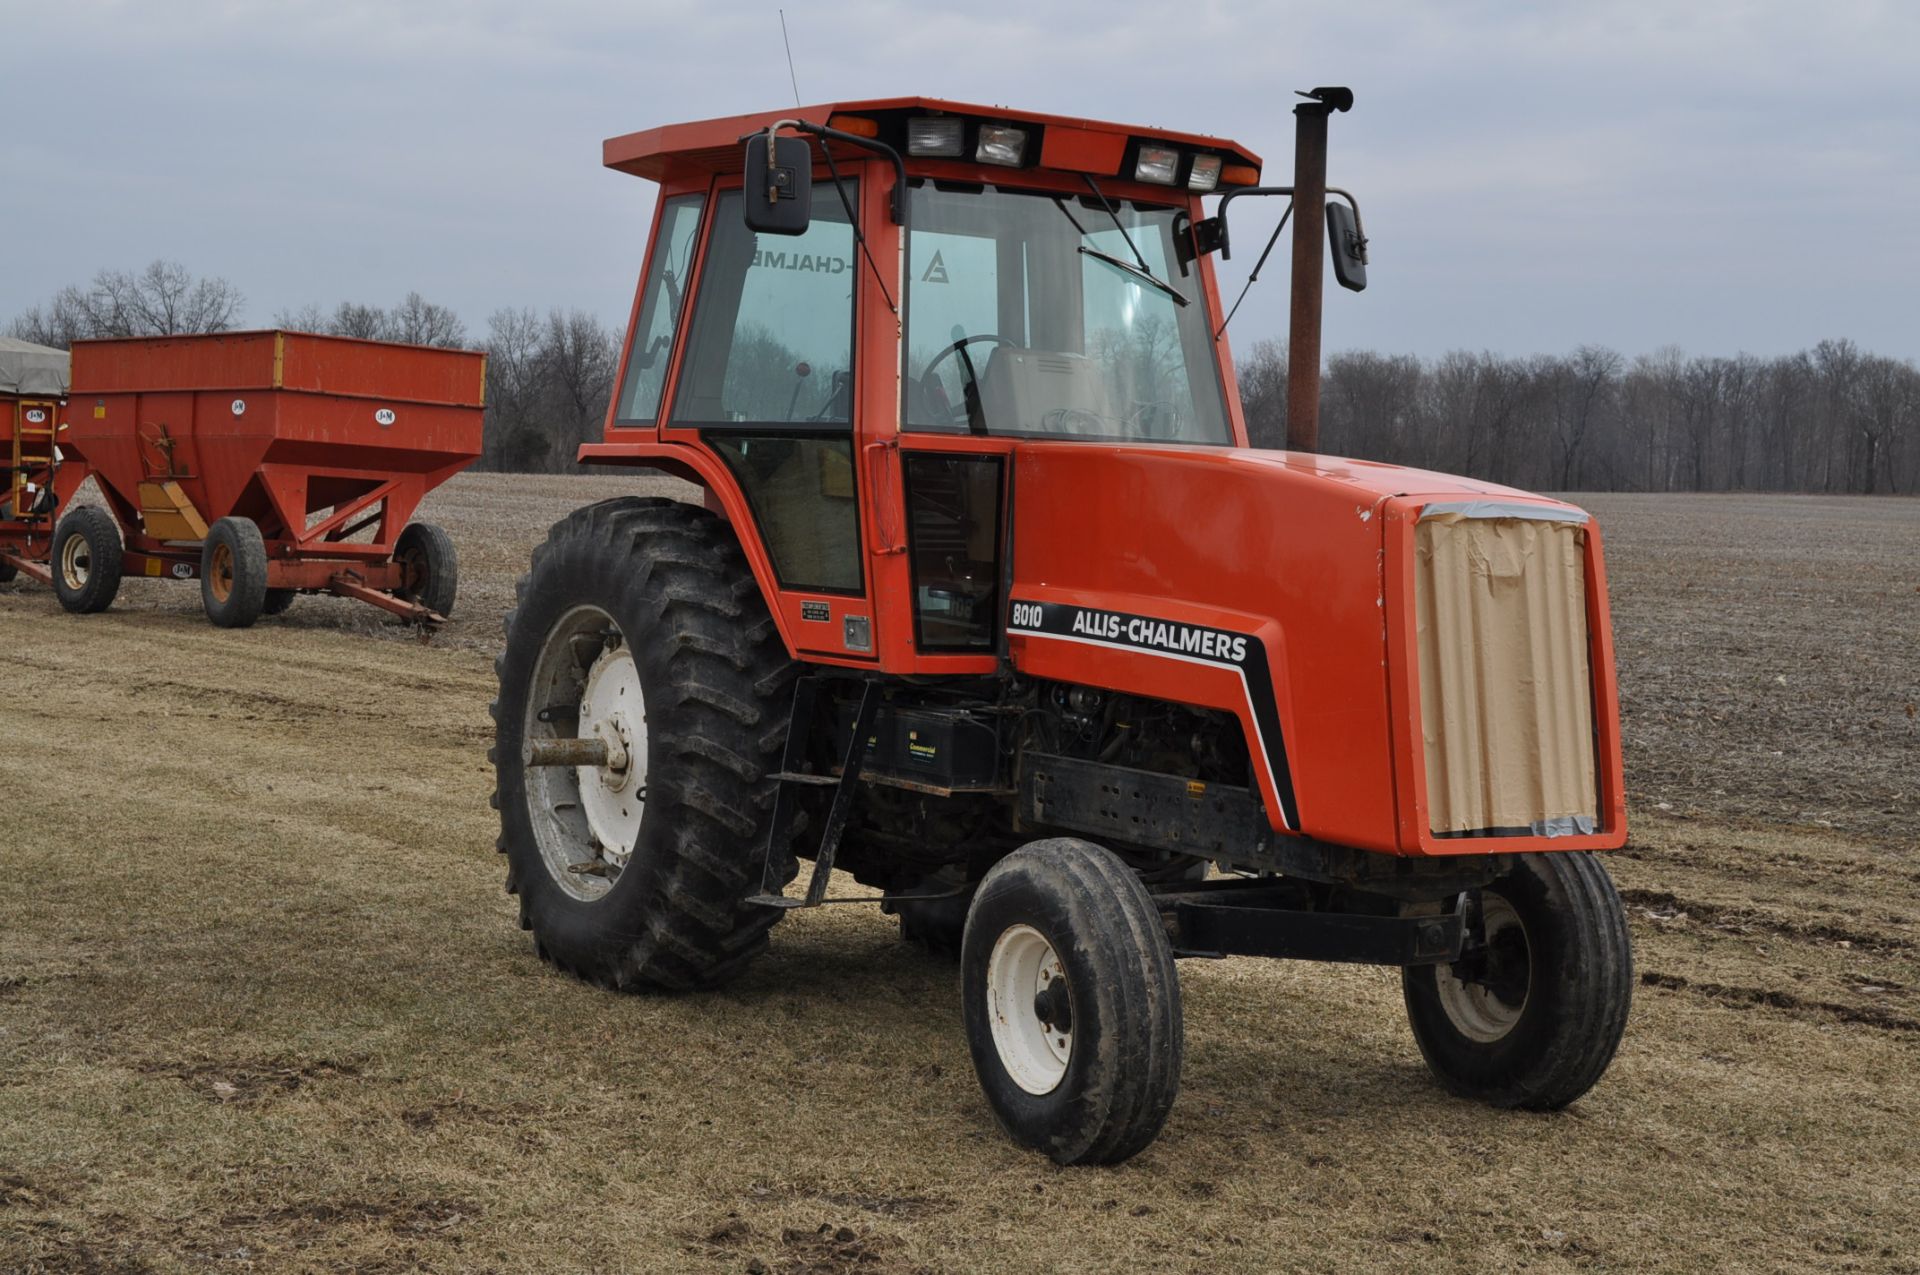 1982 Allis Chalmers 8010 tractor, power direct 20 spd, CHA, 2 remotes,540/1000 PTO, 3pt, 18.4 x 38 - Image 4 of 28